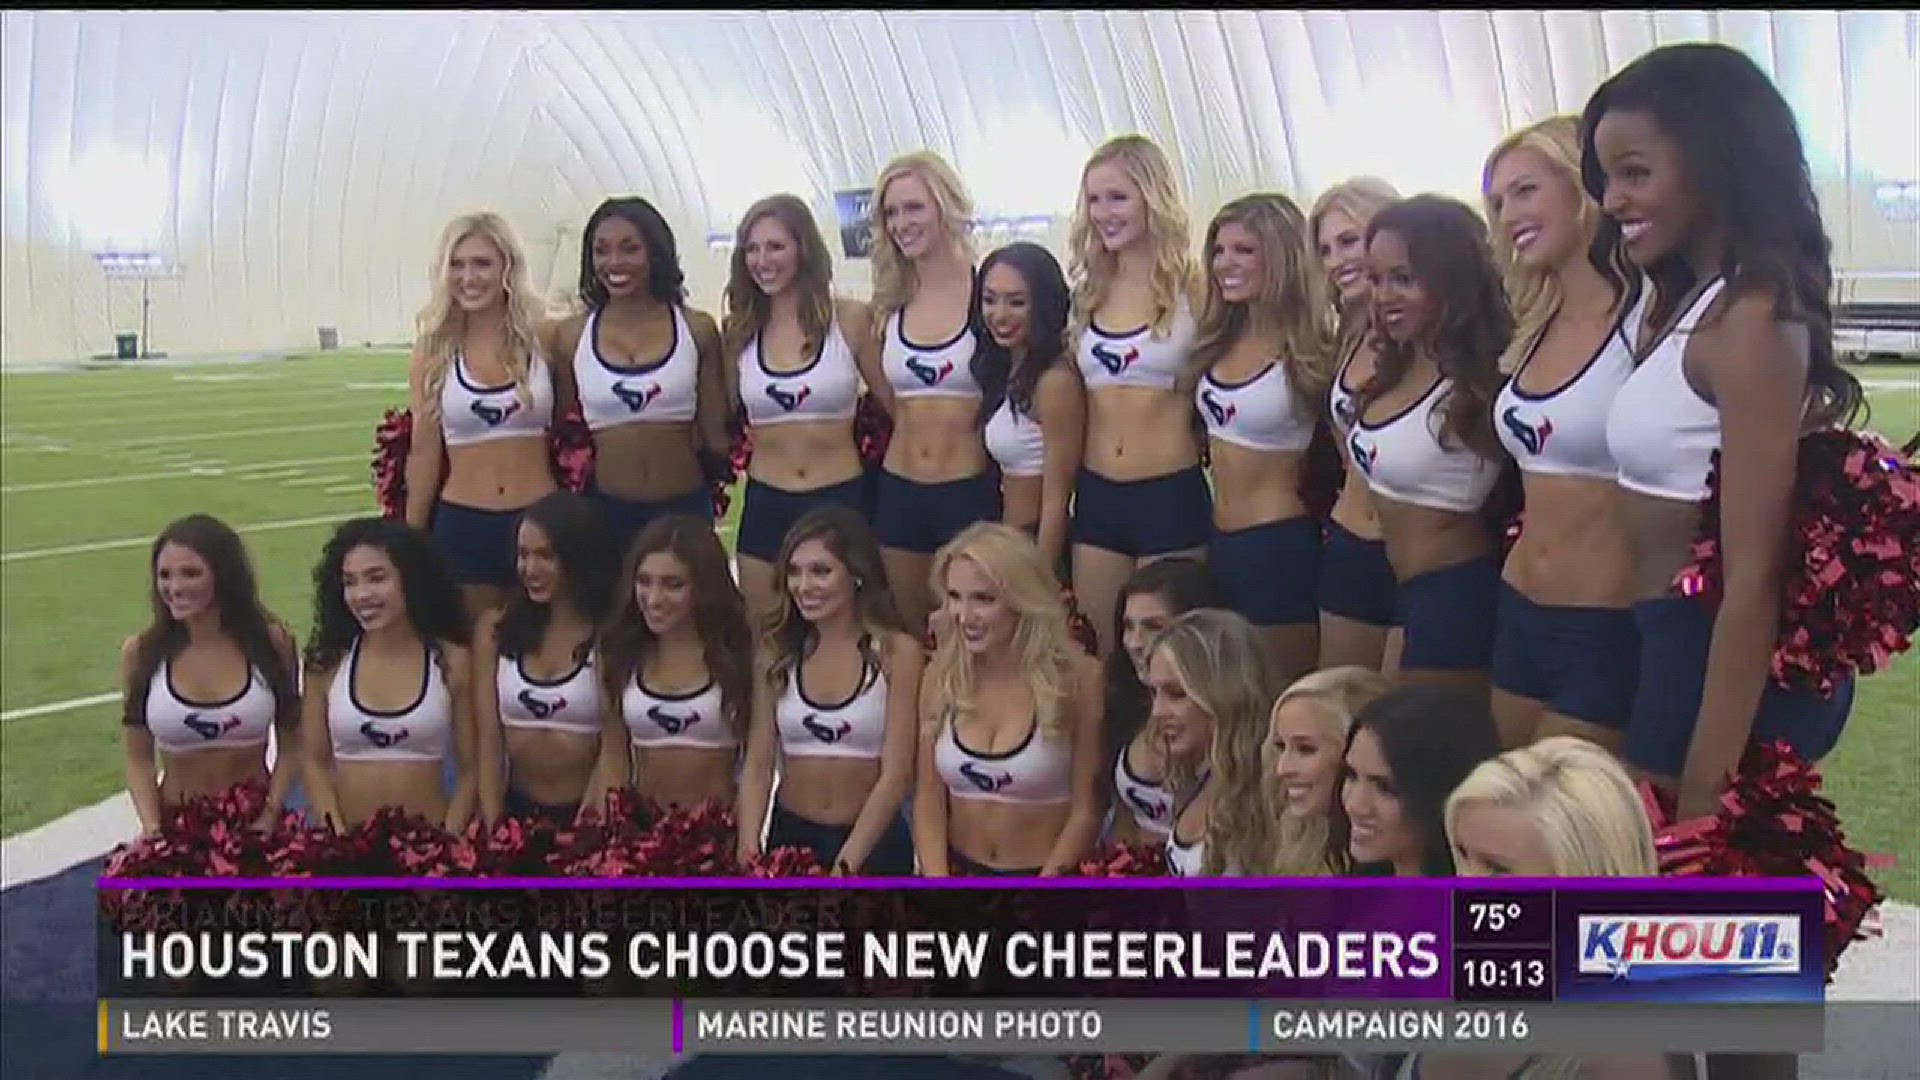 The drama is over. The Houston Texans have selected the 2016 cheerleaders.